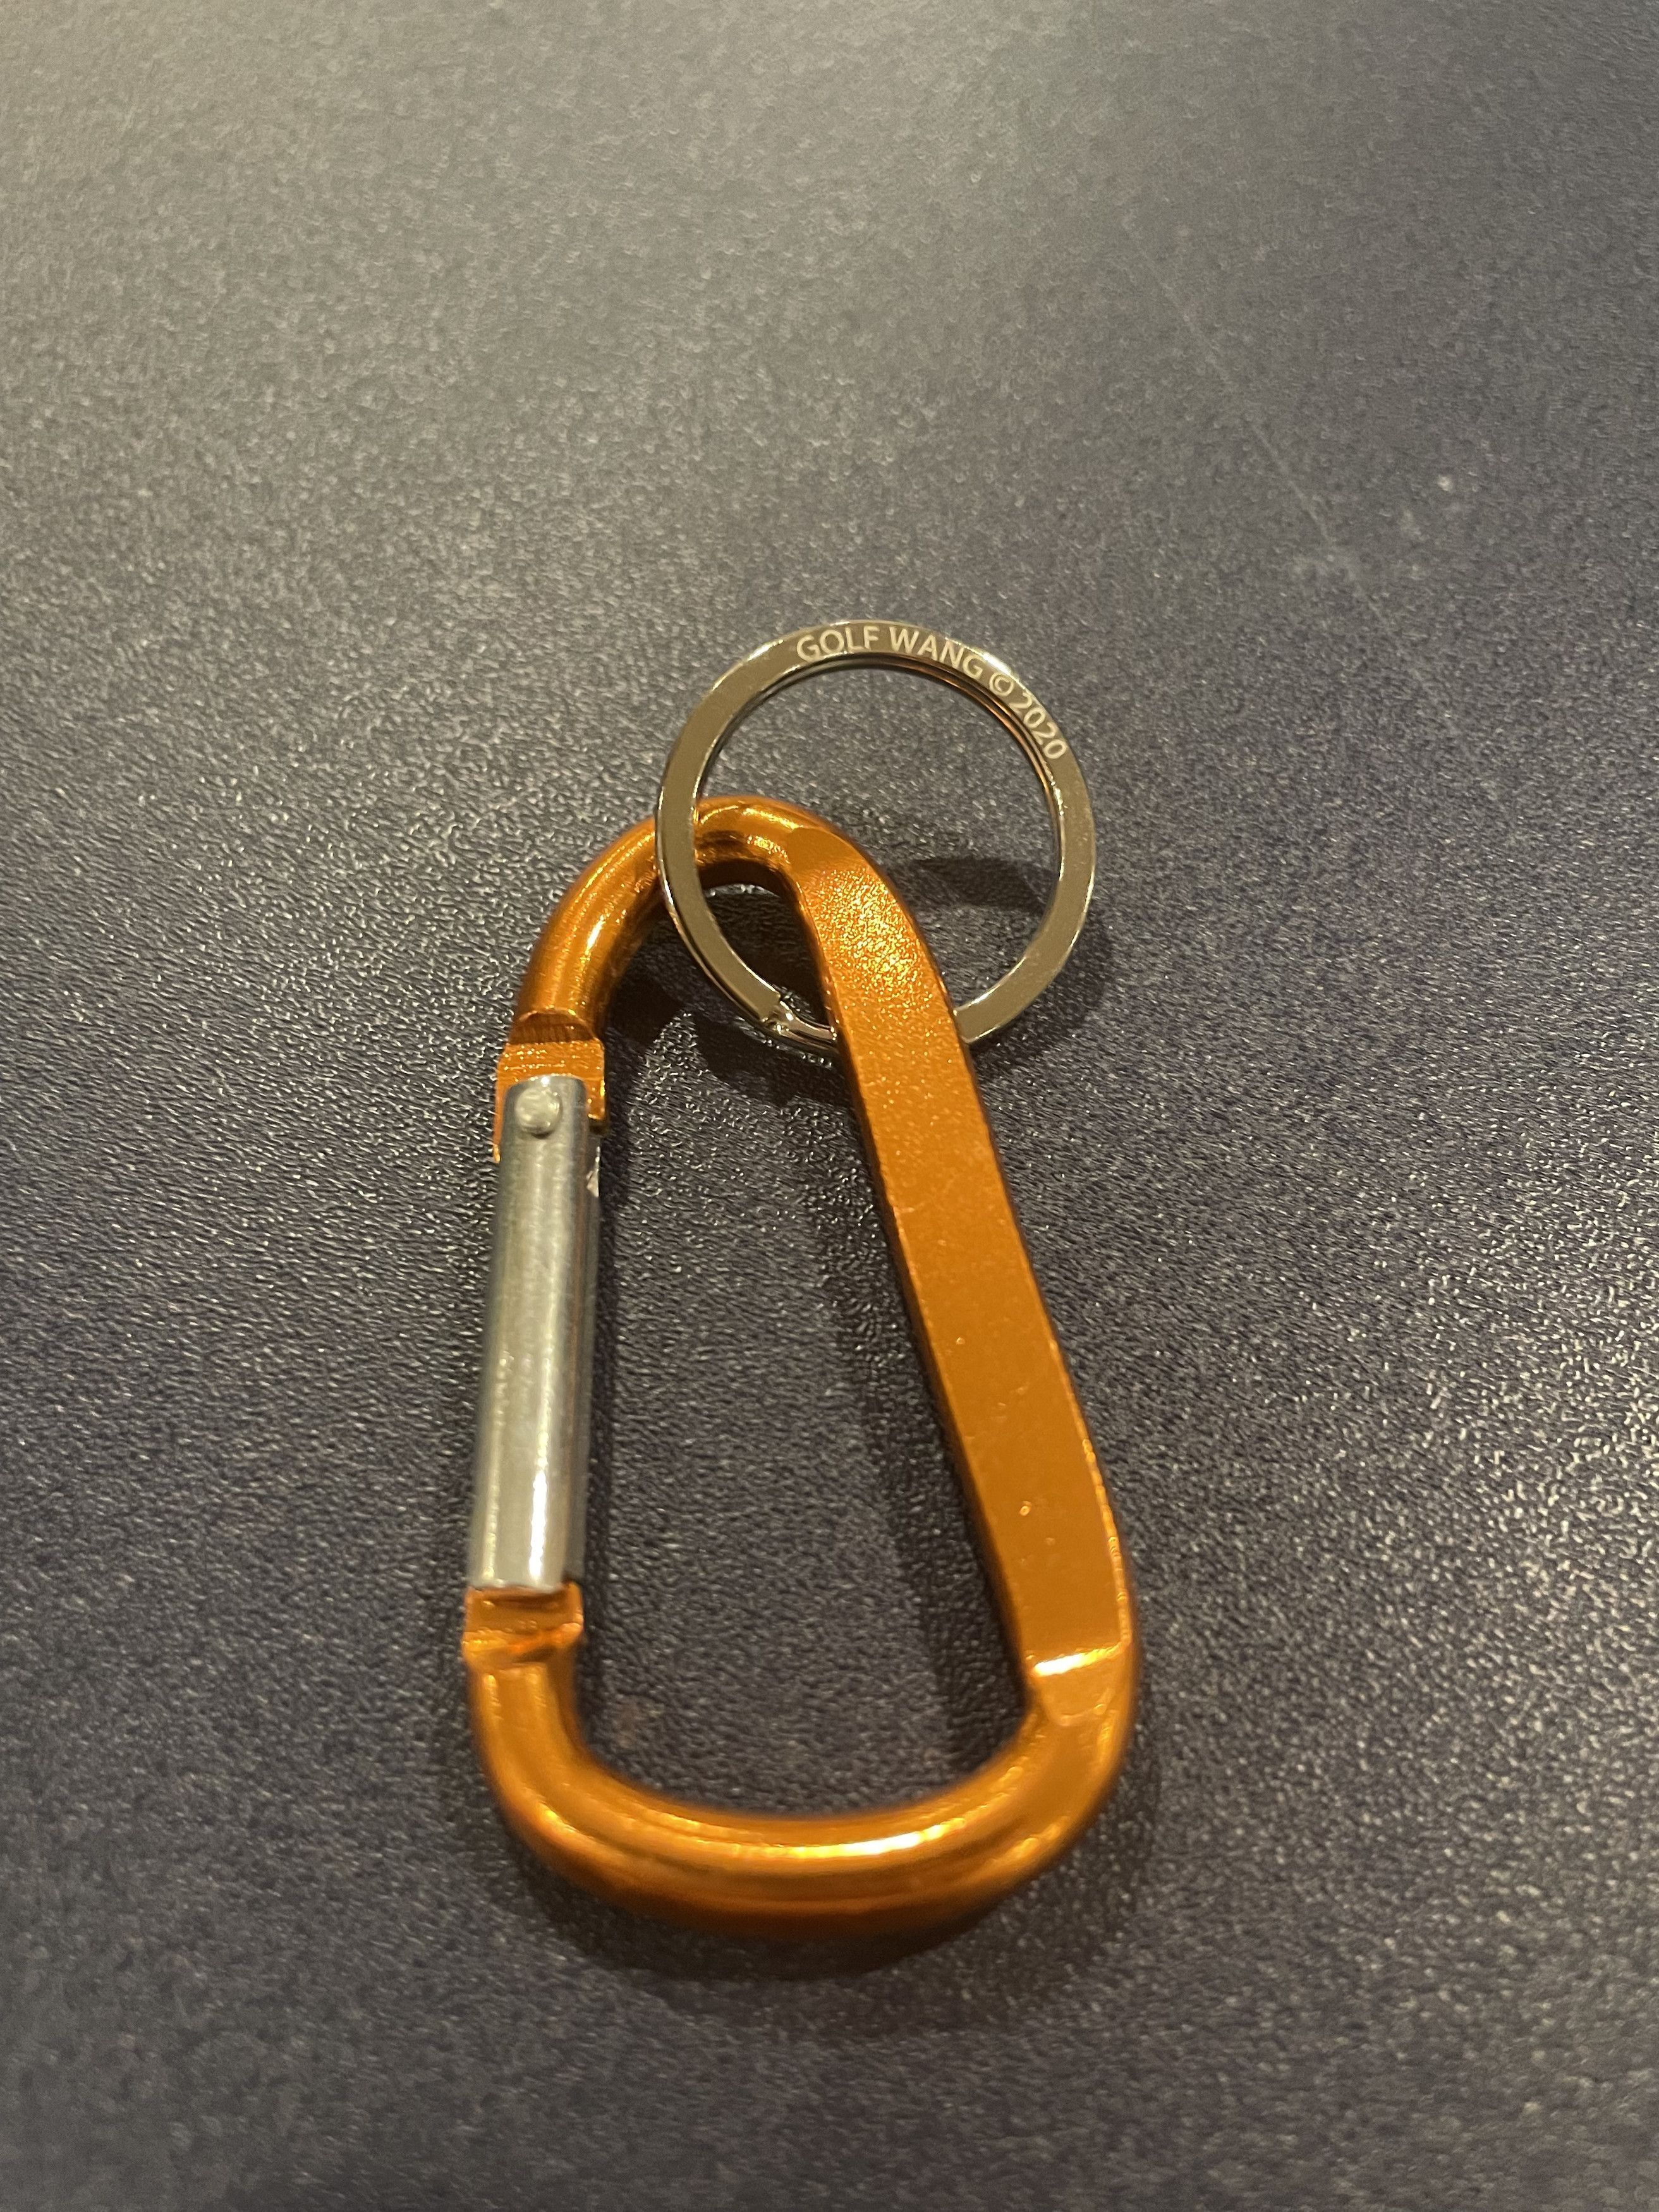 Golf Wang Golf Wang Carabiner - Orange Size ONE SIZE - 3 Preview